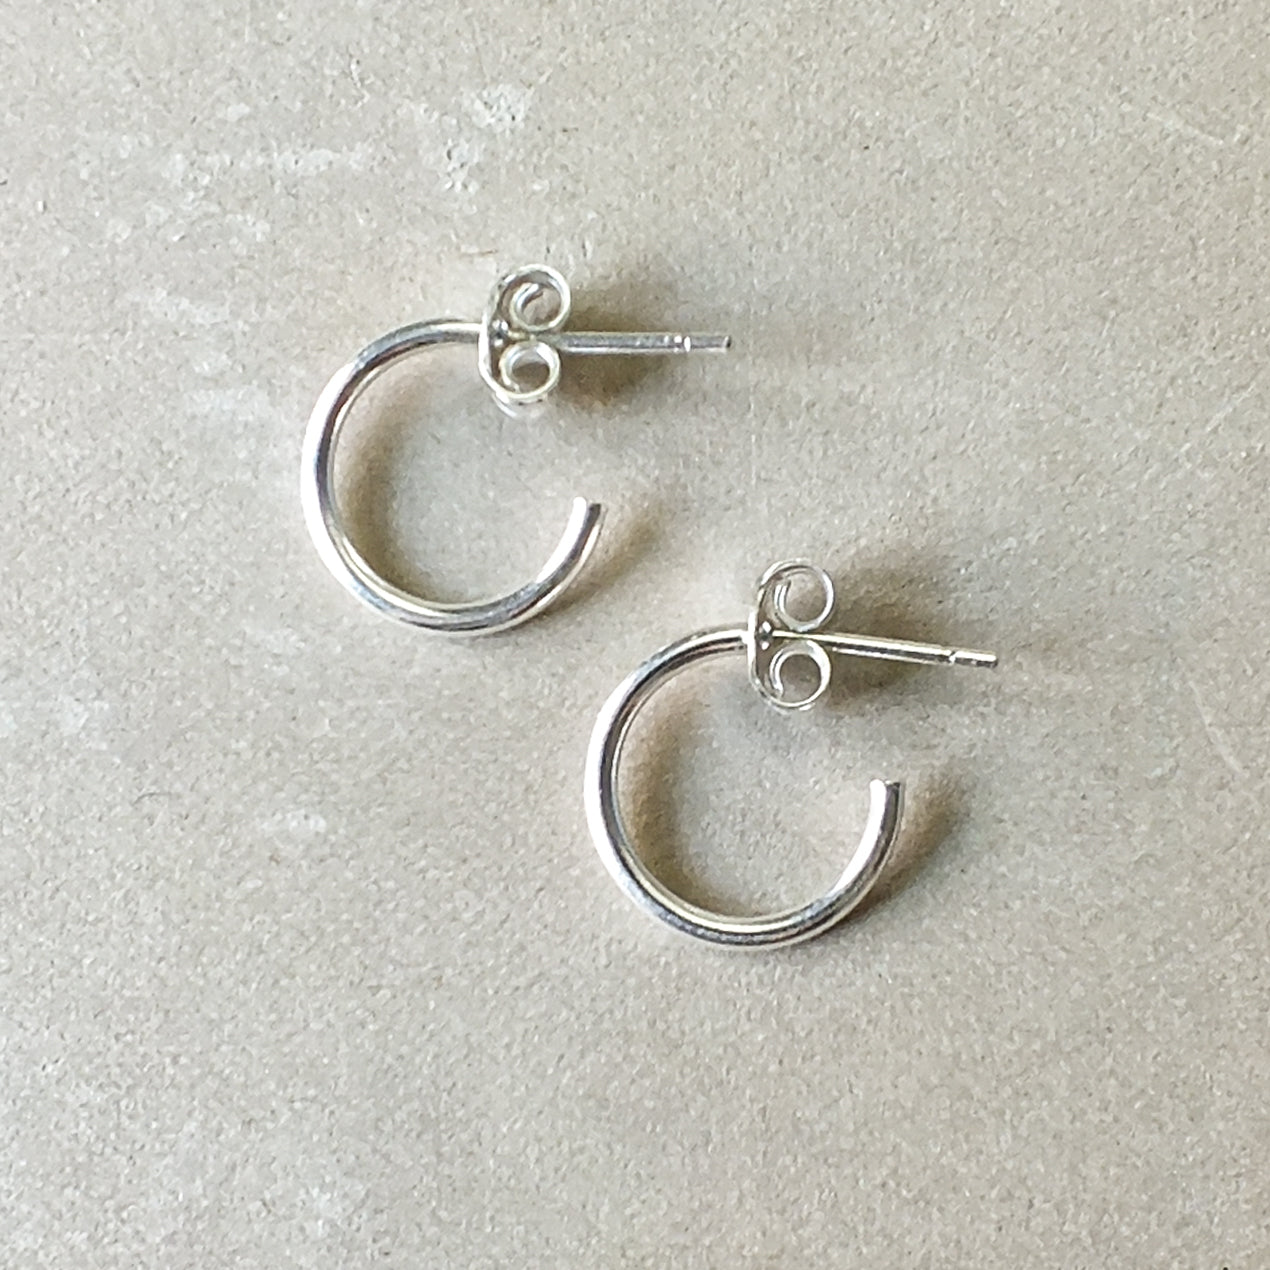 A pair of dainty Becoming Jewelry sterling silver Open Hoop Earrings, small on a gray background.